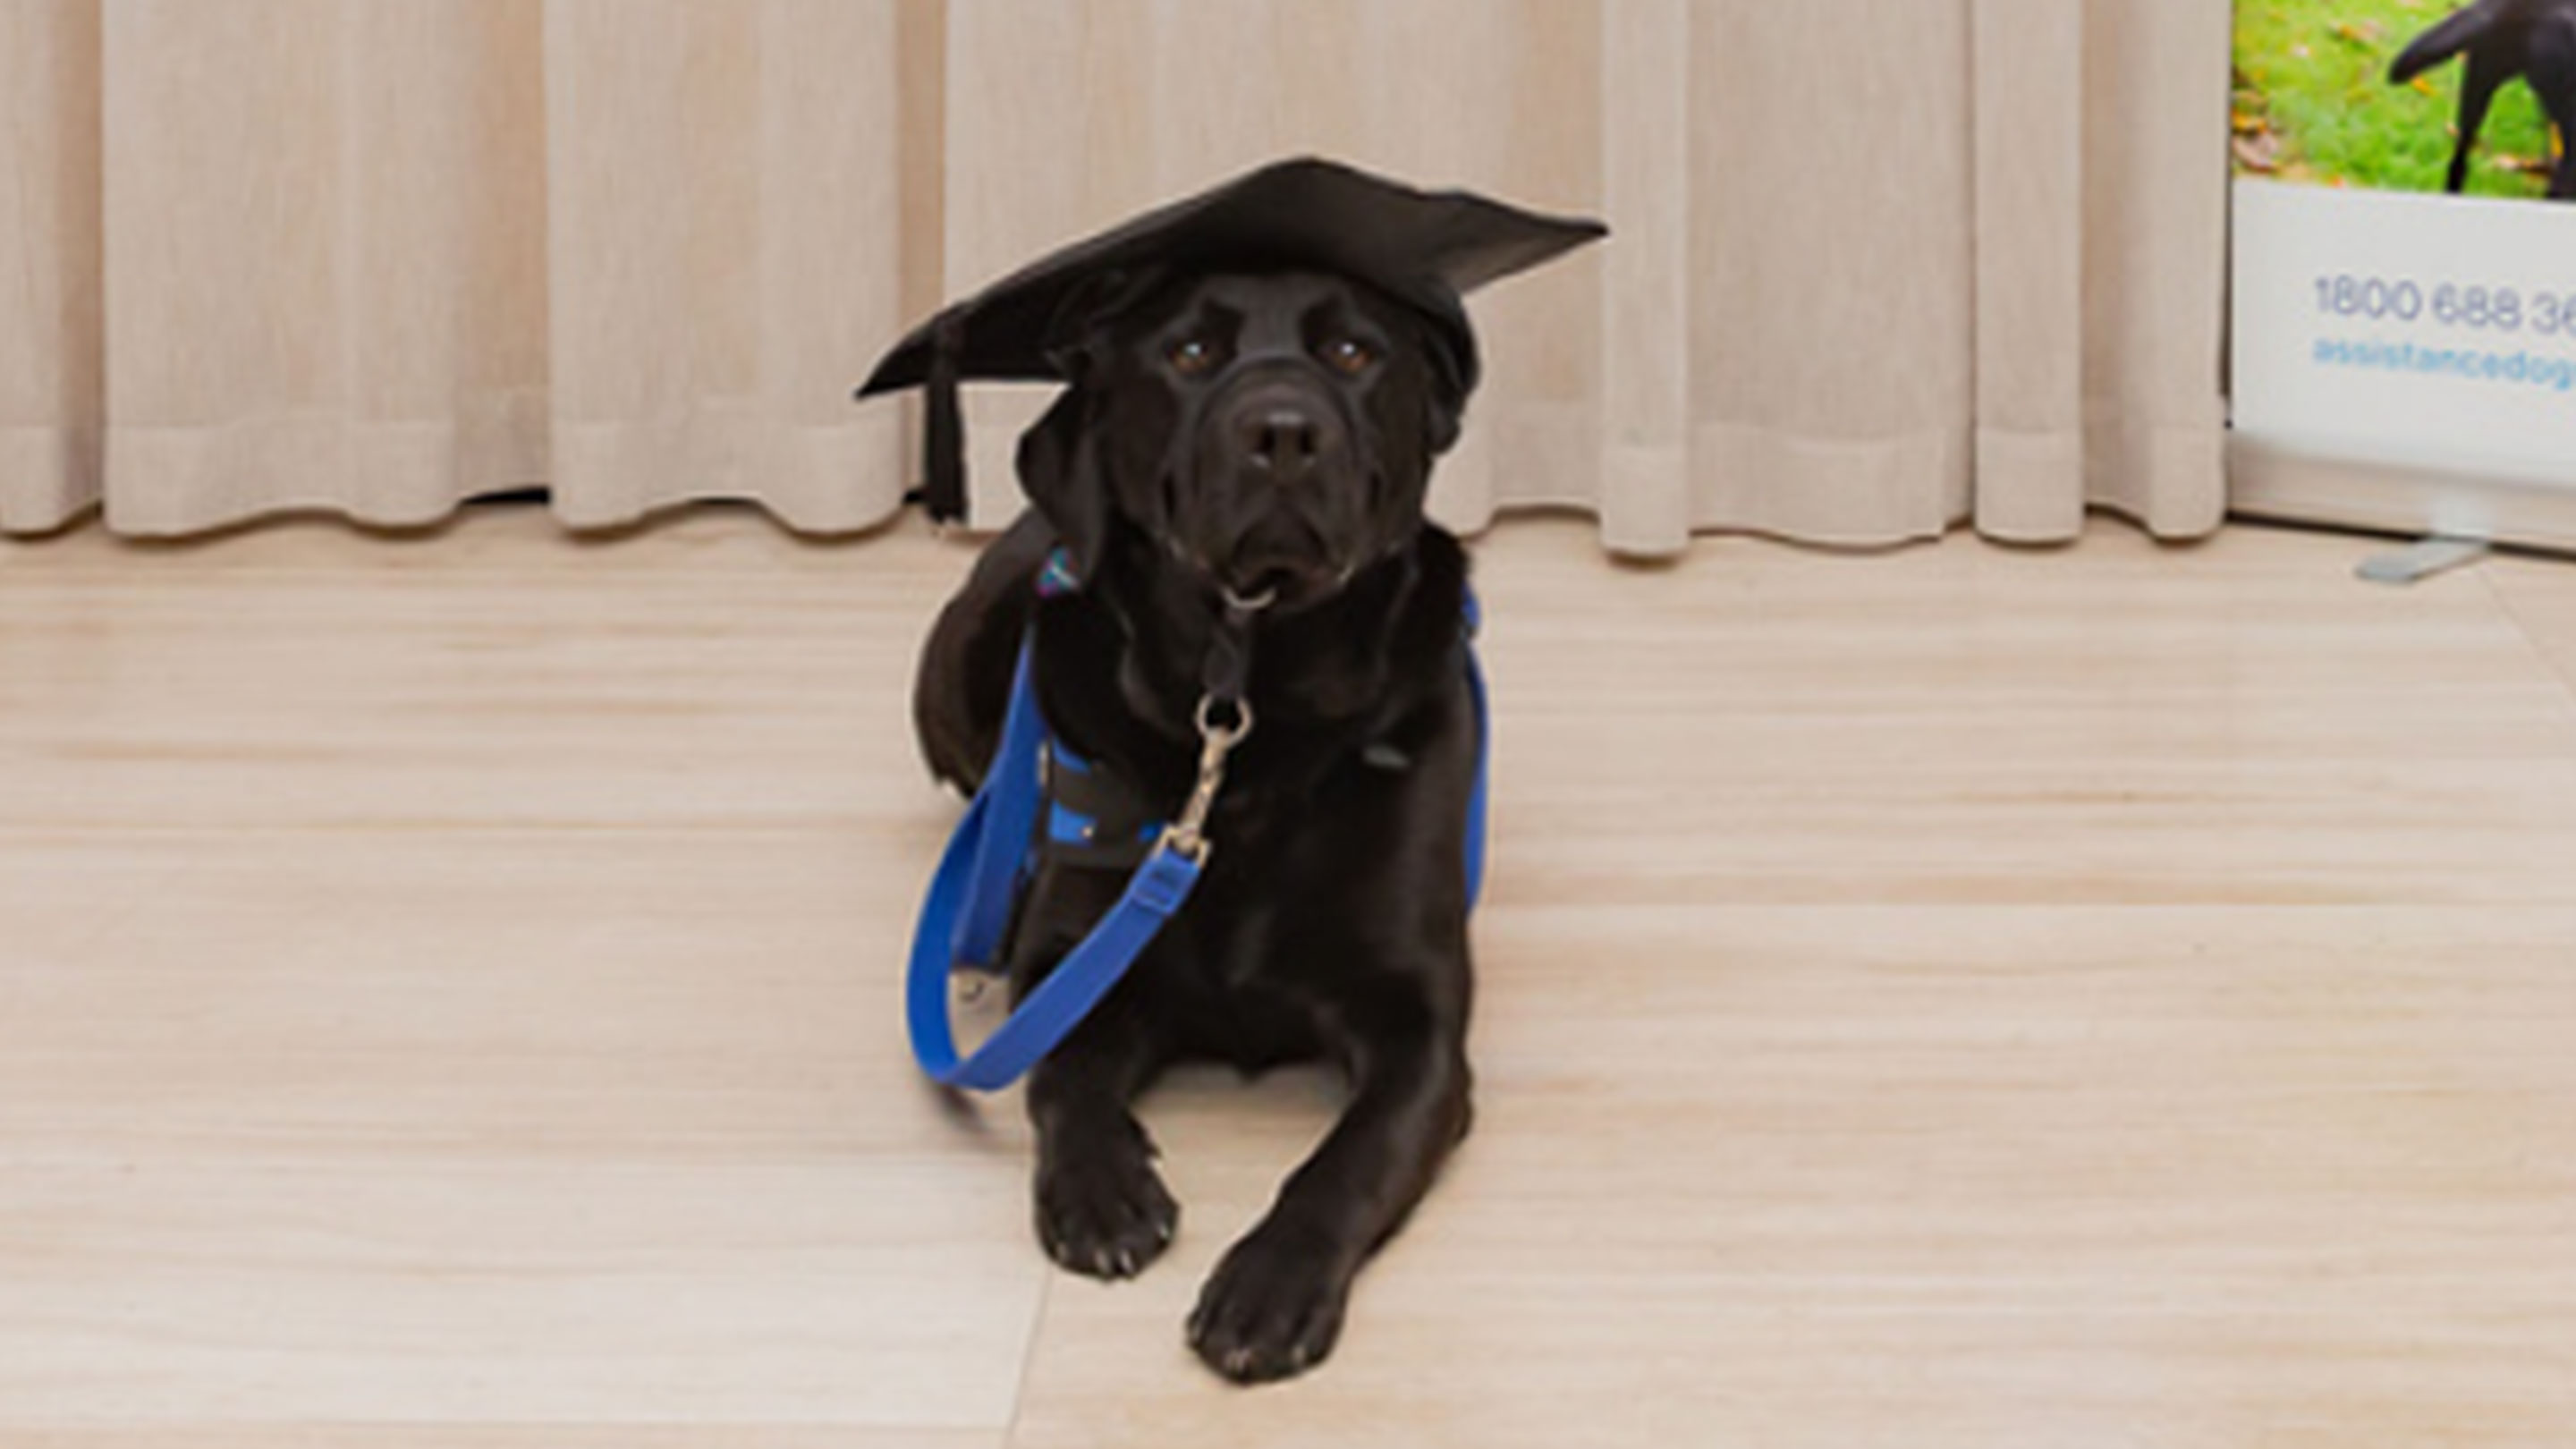 Image Scout graduating from training as a highly skilled and fully qualified Autism Assistance Dog